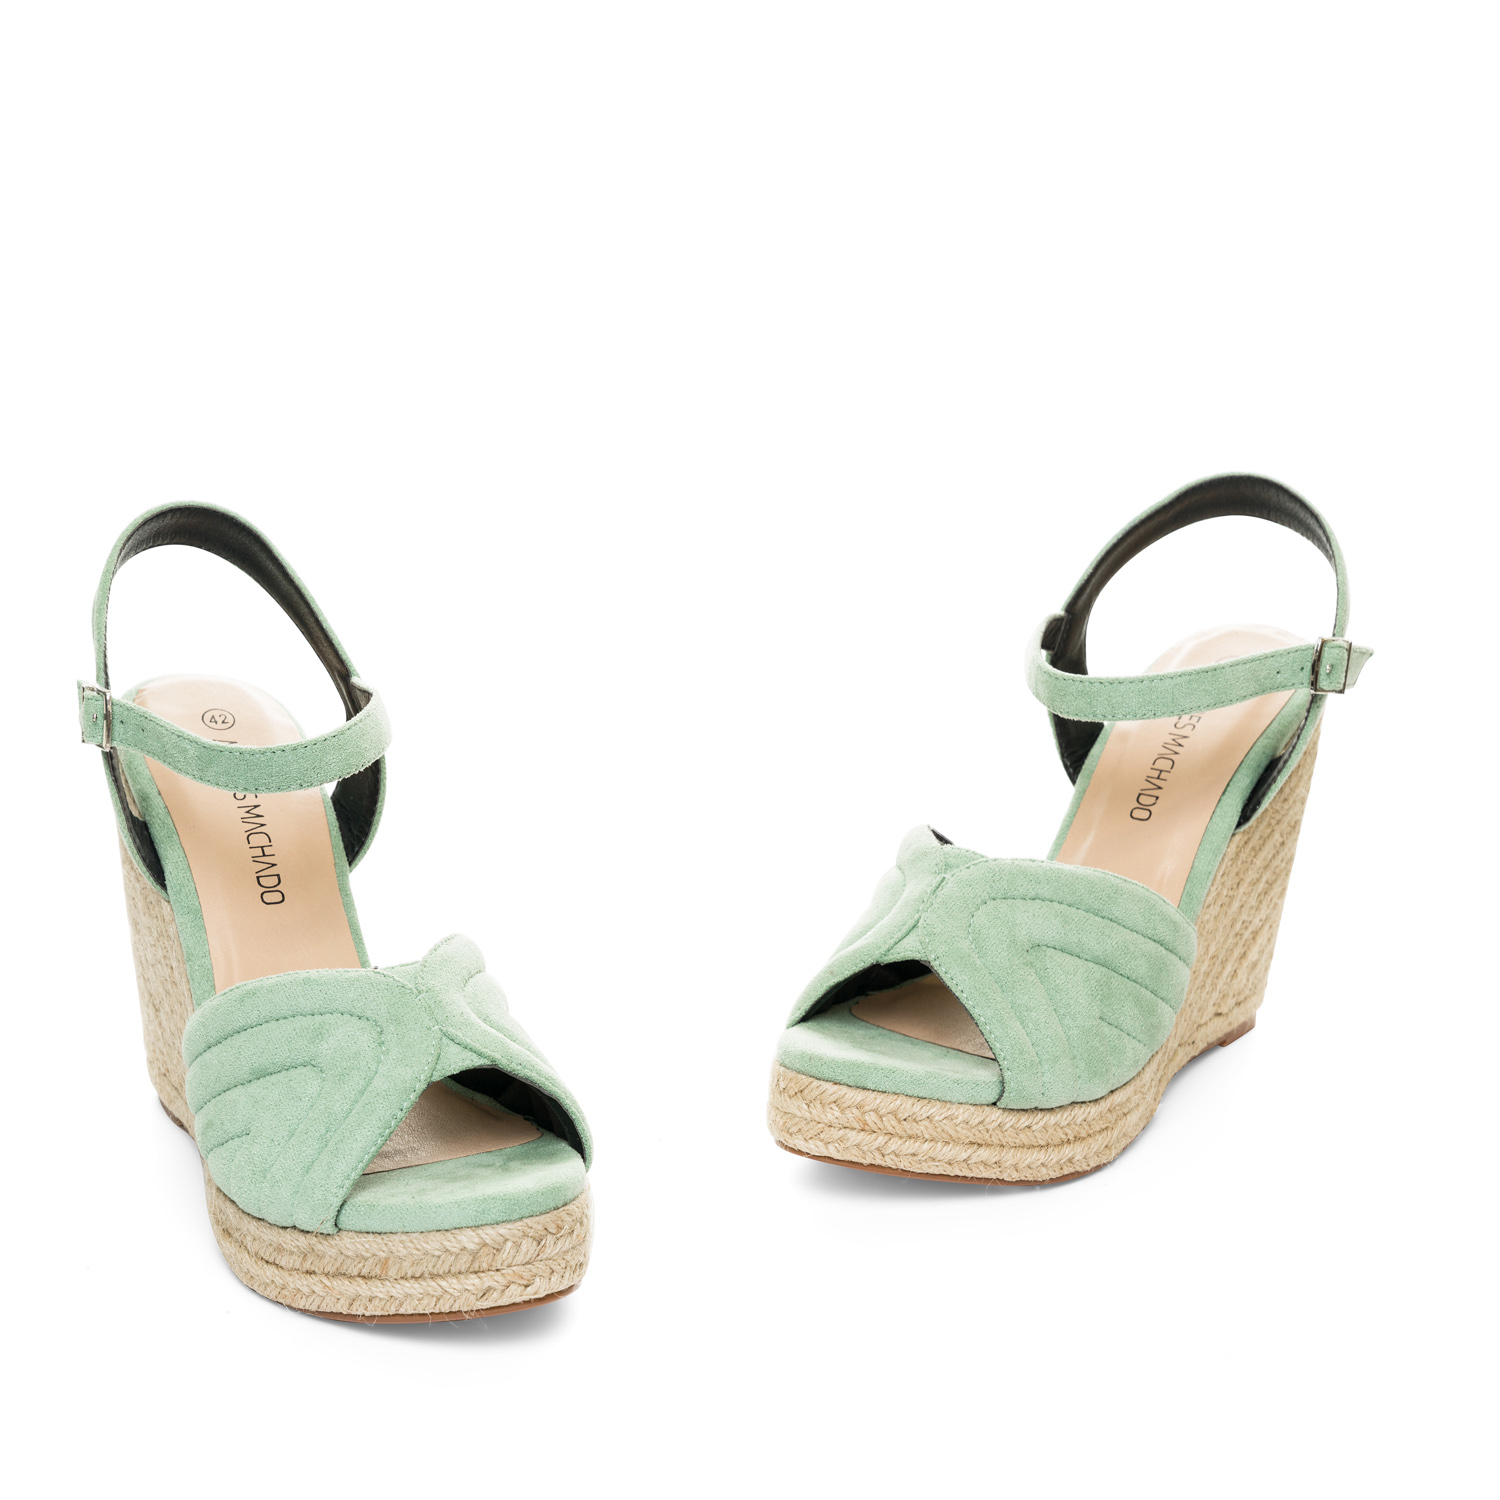 Mint faux suede espadrilles with jute wedge 